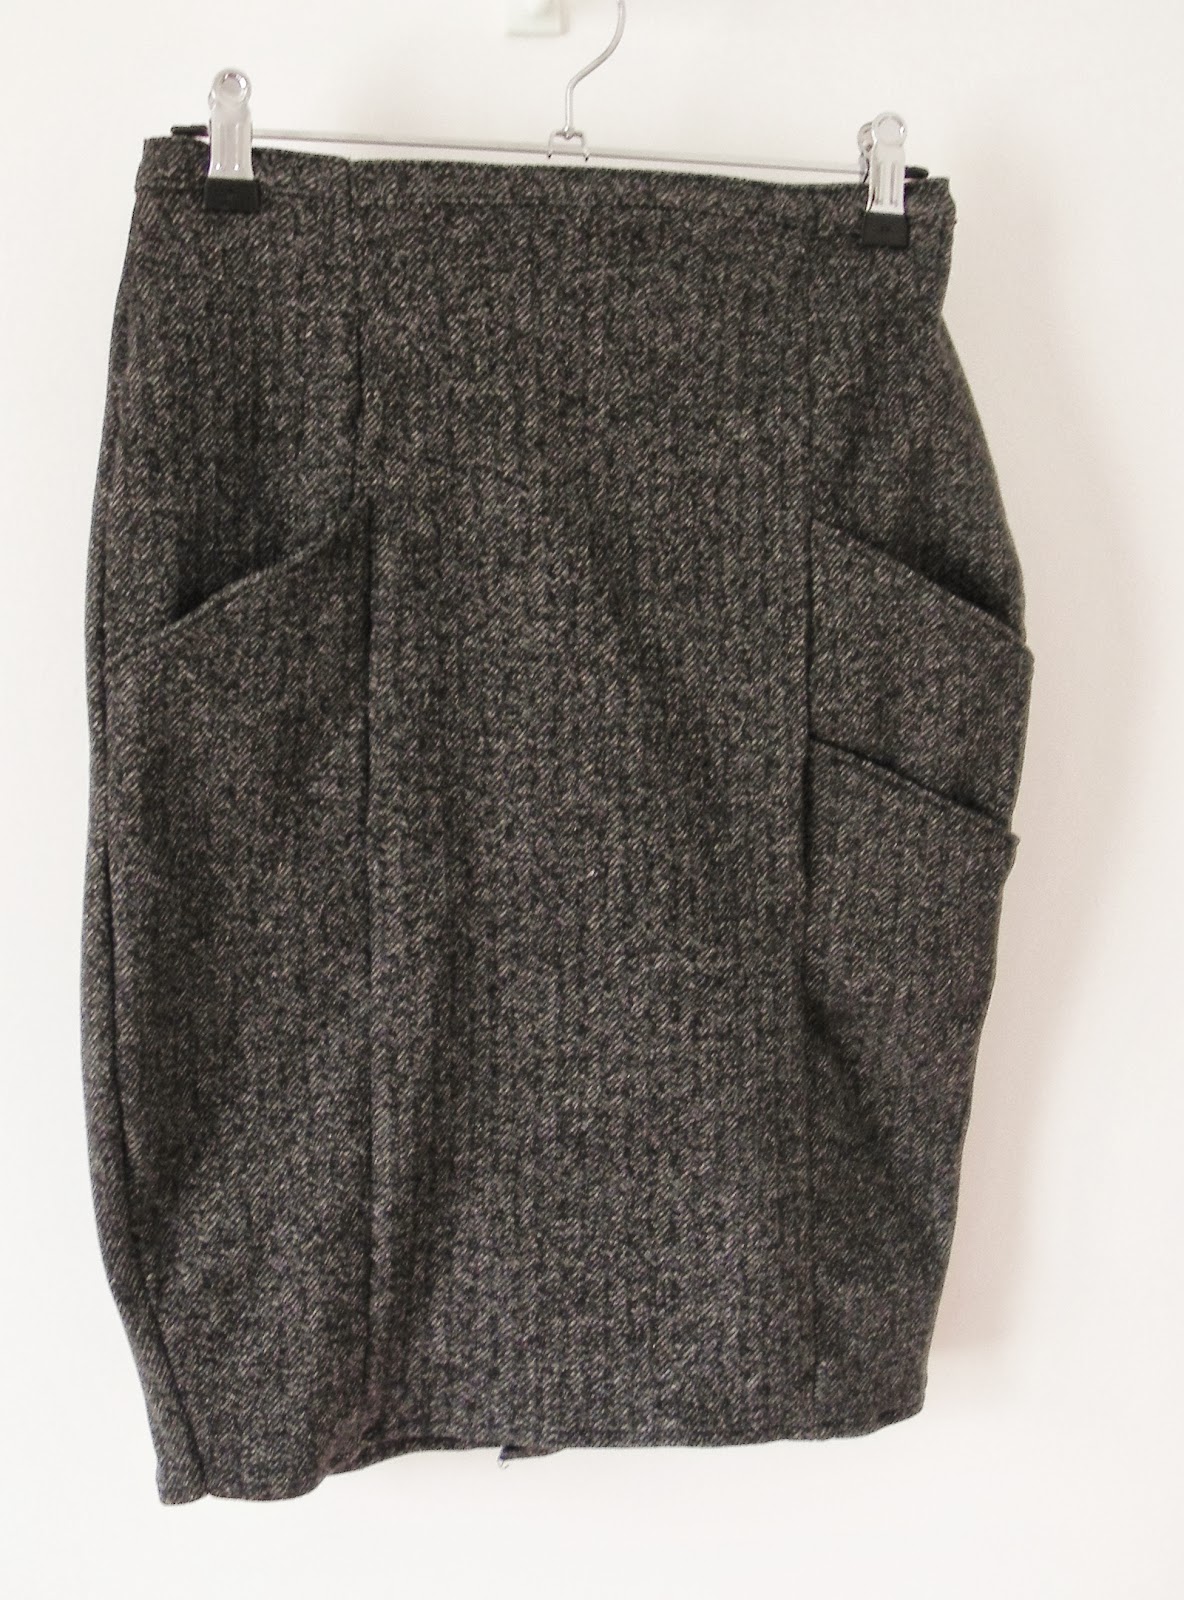 Diagonal Pocket Pencil Skirt - All Wrapped Up